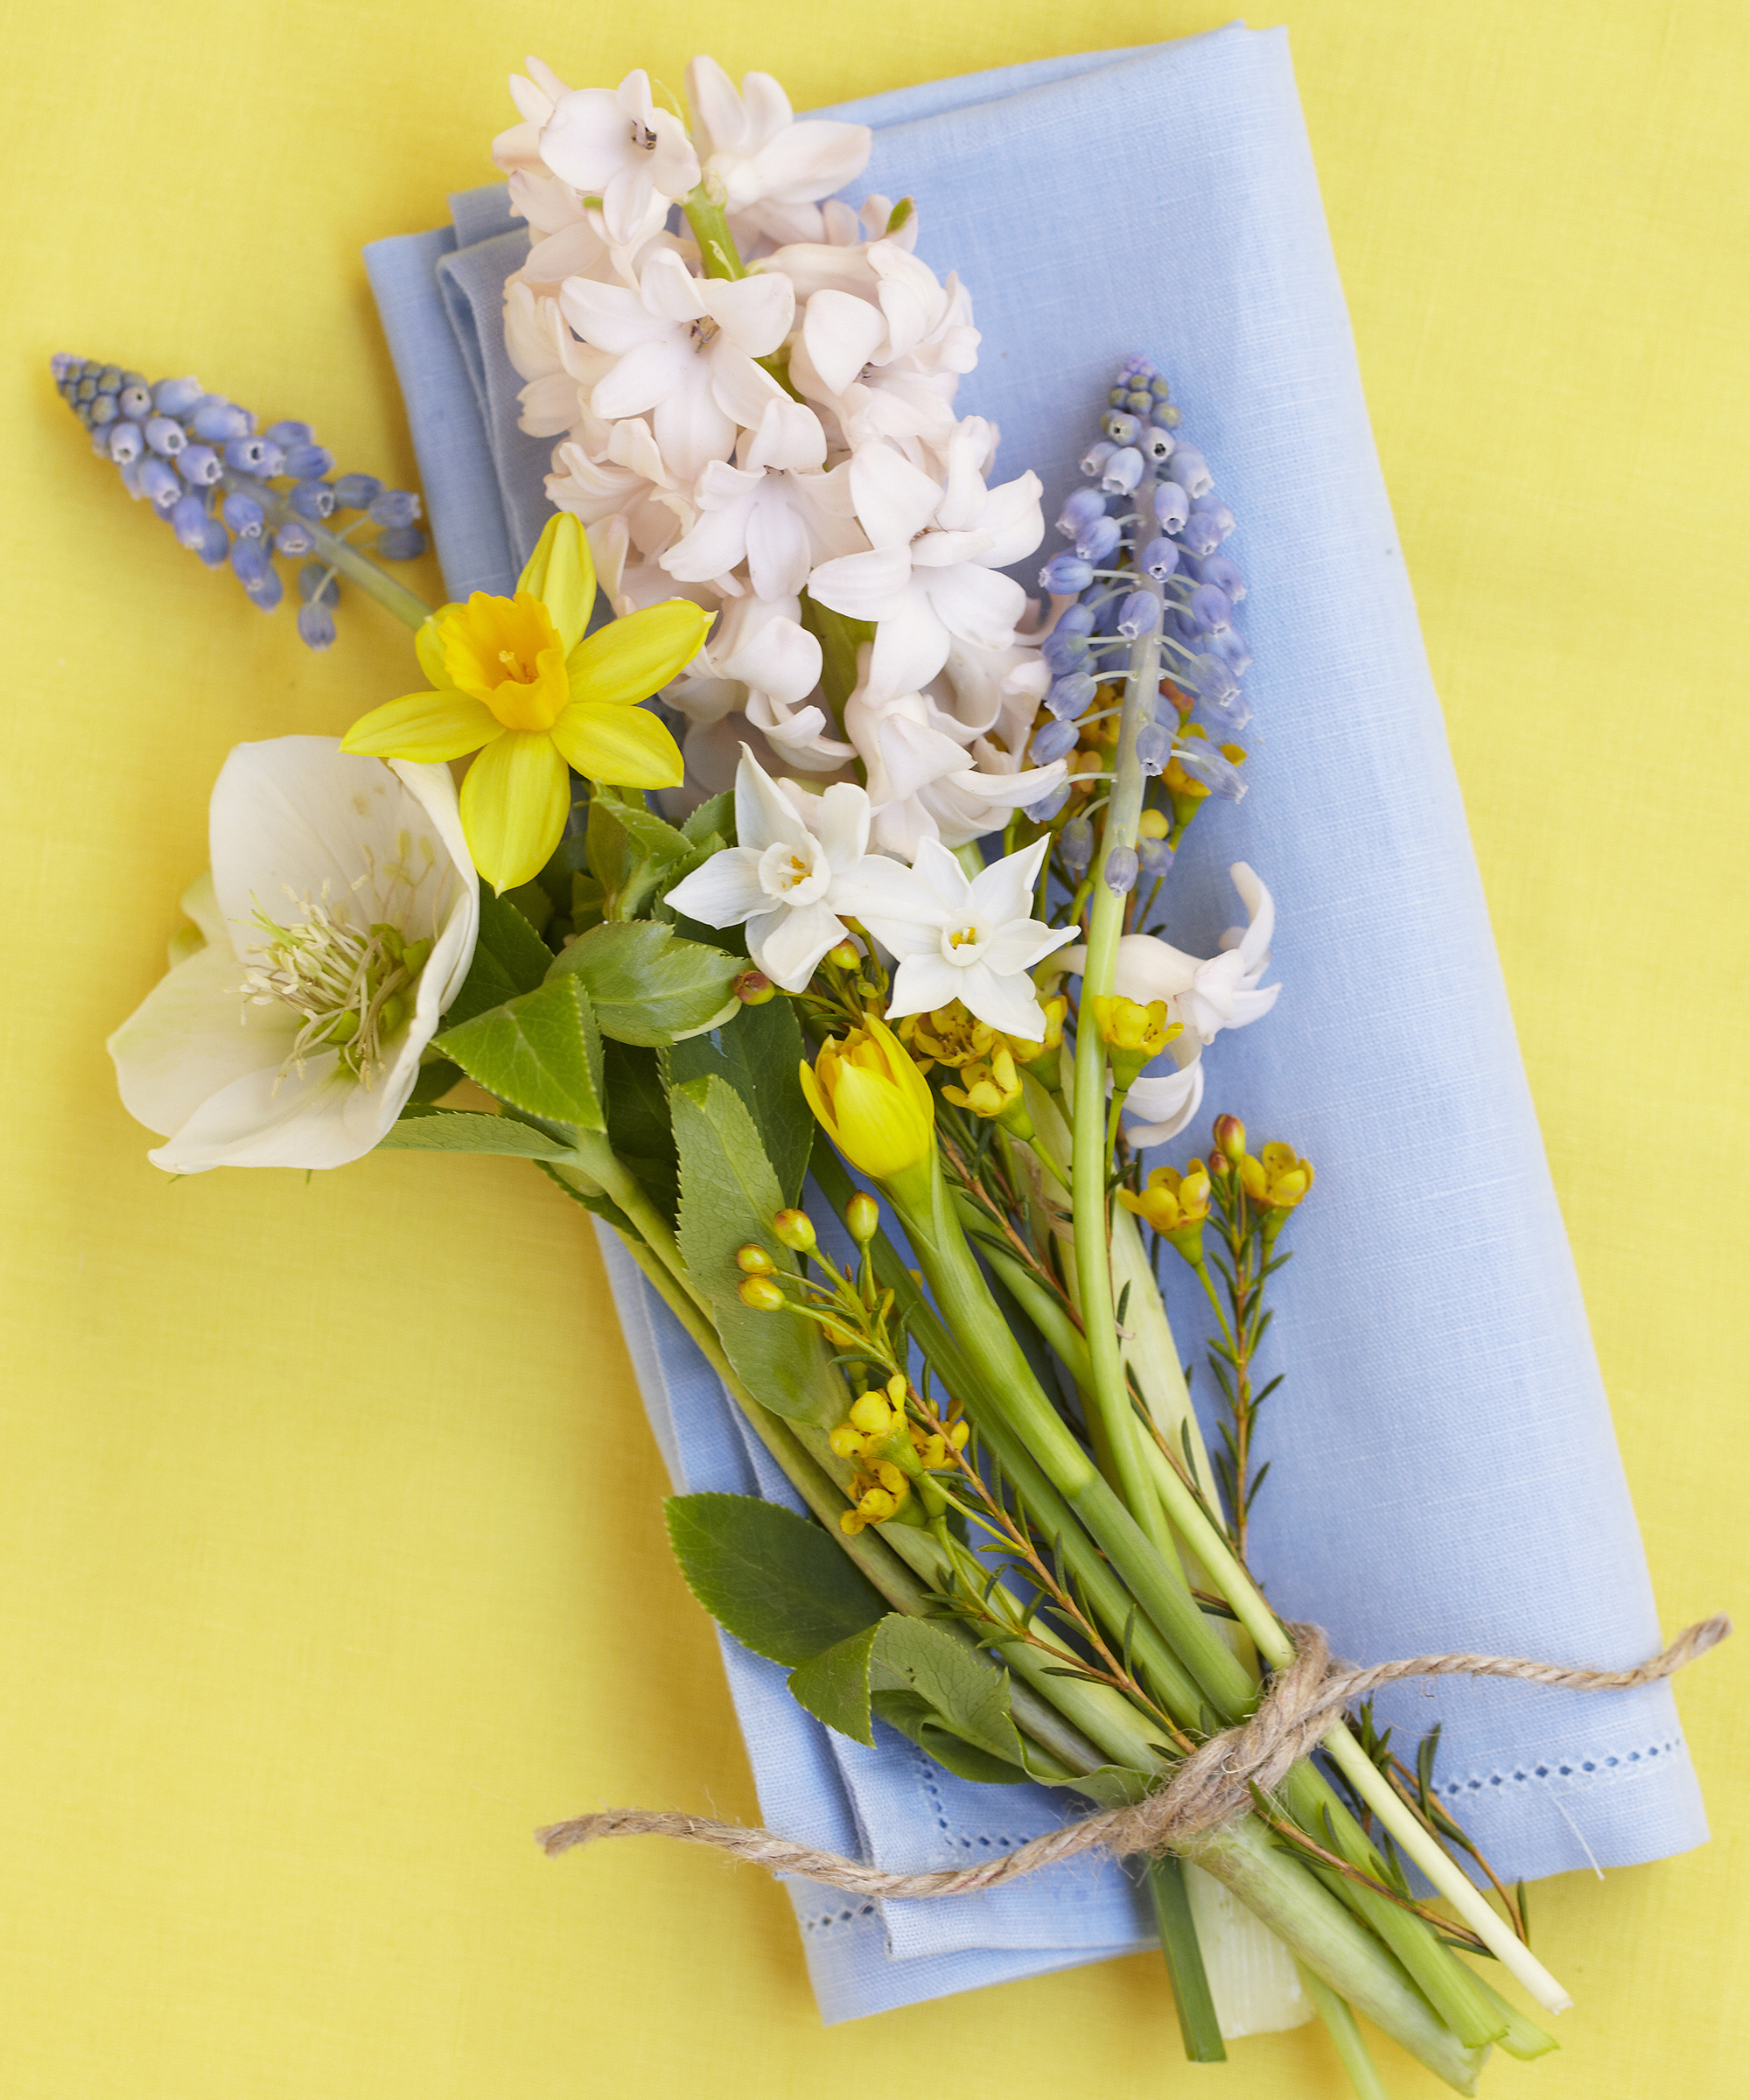 Mini bouquet of spring flowers with a blue napkin on a yellow background